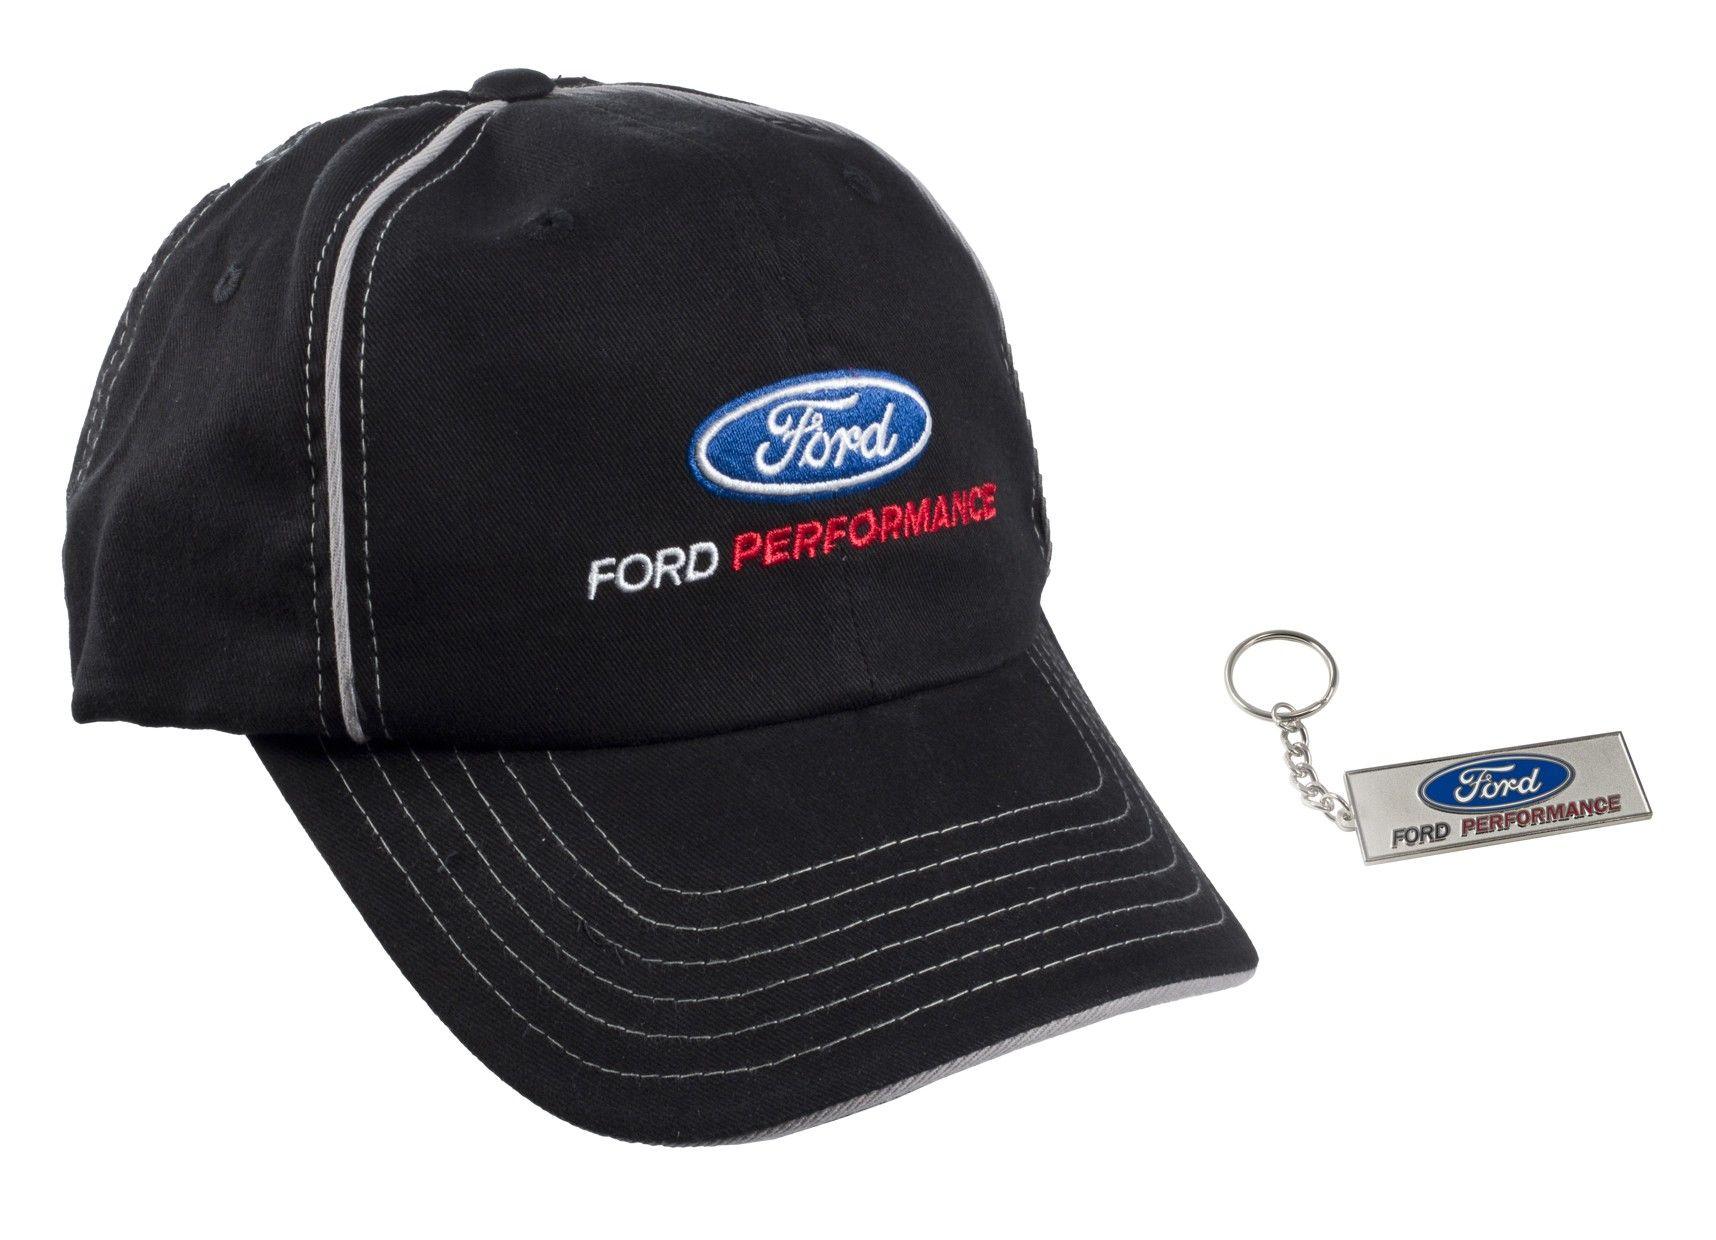 Black and Blue Oval Logo - Ford Performance Oval Logo Black & Silver Adjustable Hat Cap w/ Keychain